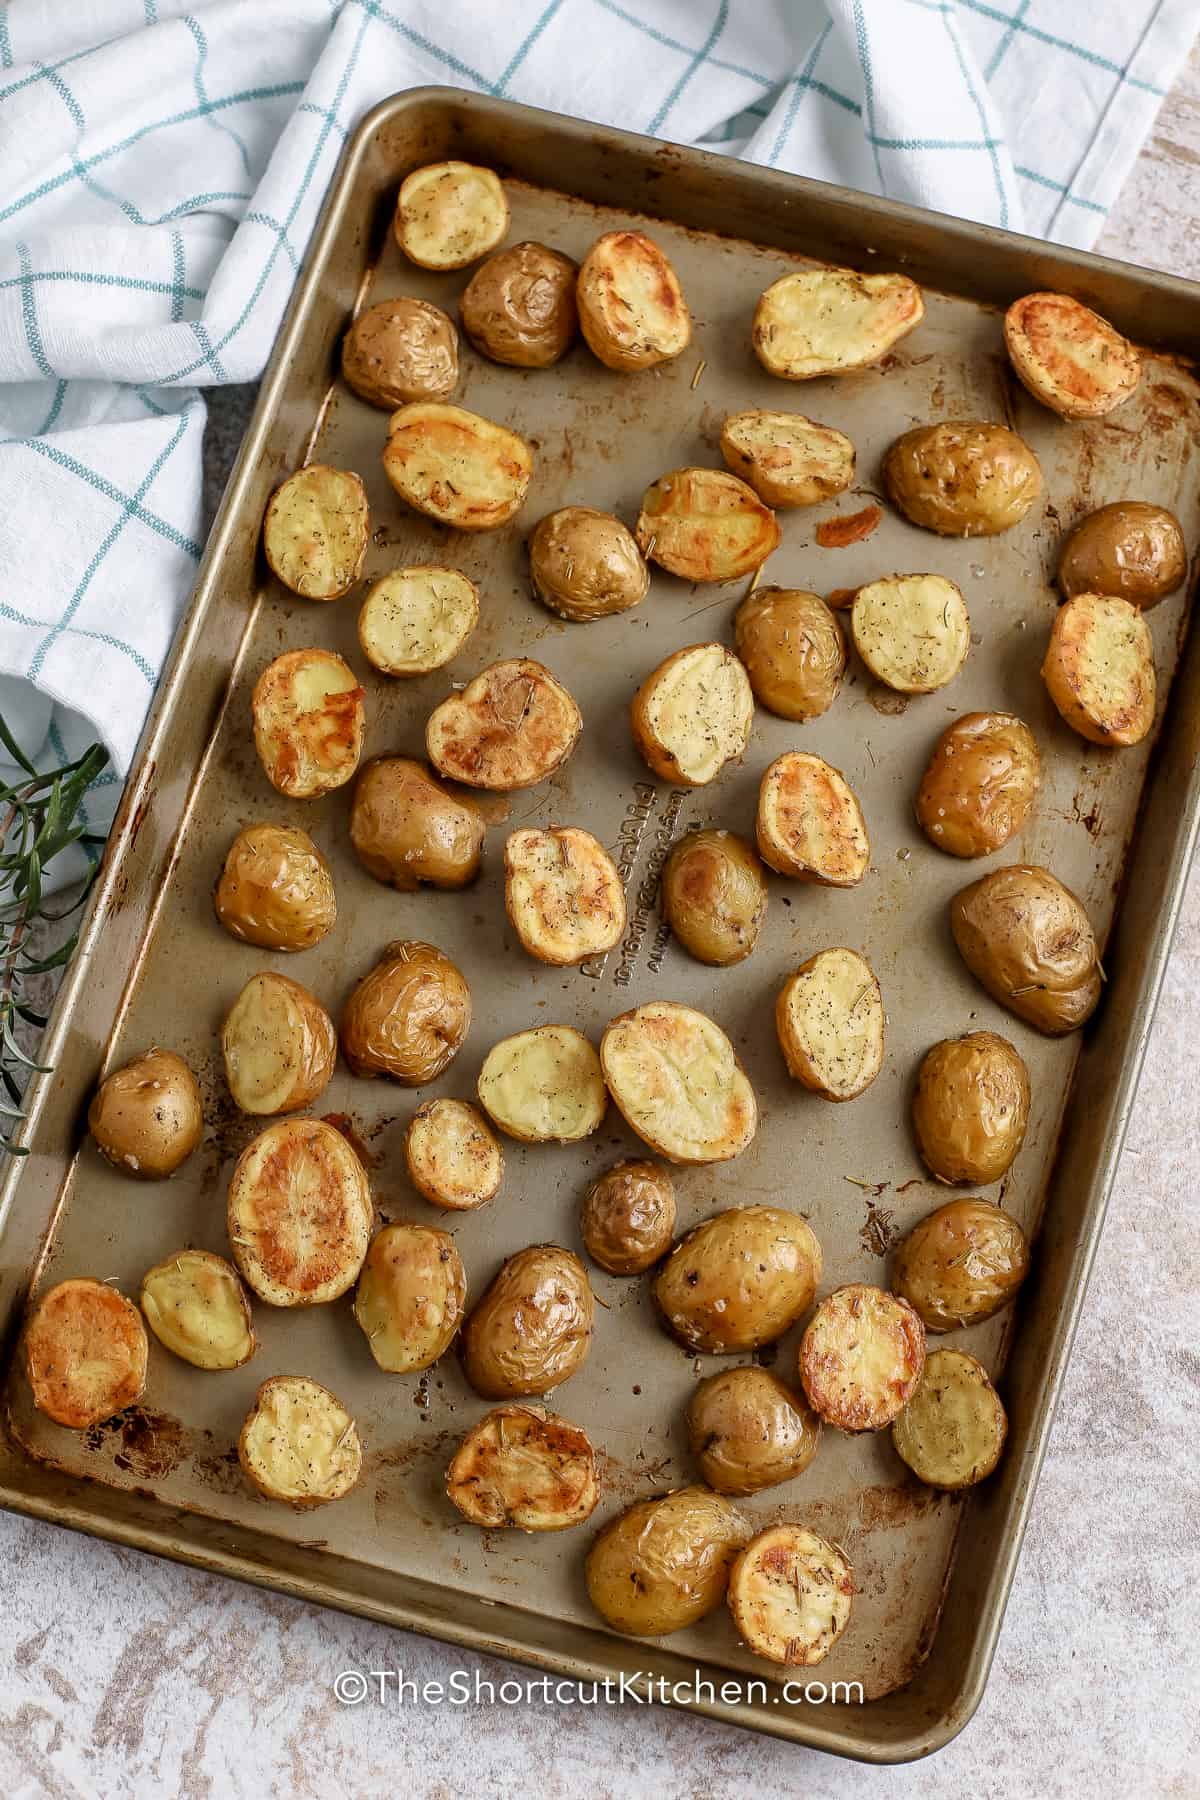 cooked Rosemary Roasted Potatoes on a baking sheet